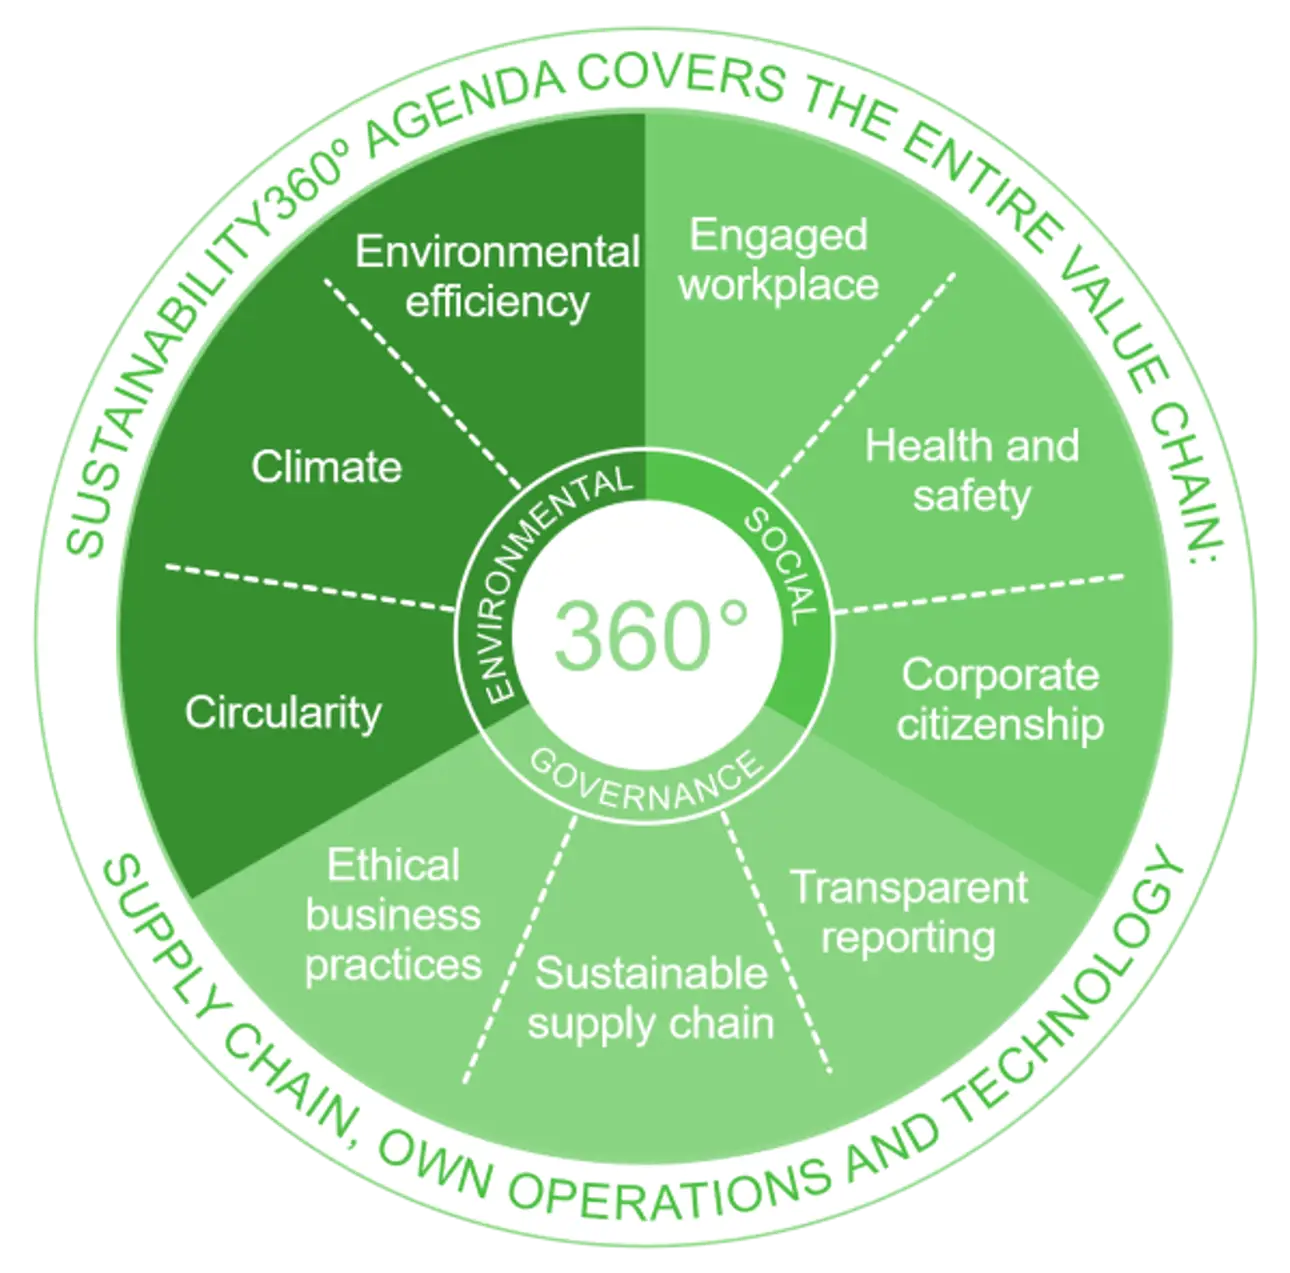 Valmet’s Sustainability360° Agenda takes a comprehensive approach to sustainability across Valmet’s value chain. The agenda covers Valmet’s entire value chain including the supply chain, own operations and the use phase of Valmet´s technologies at customer sites.